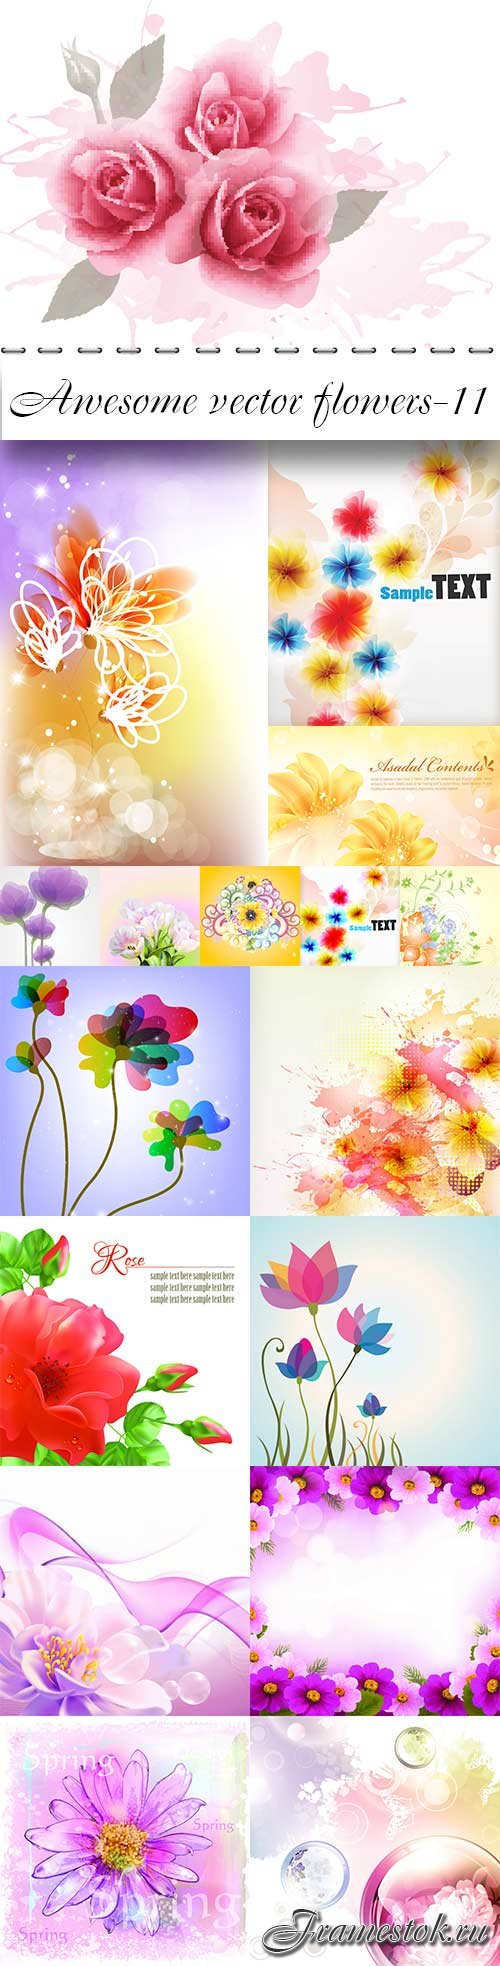 Awesome vector flowers-11